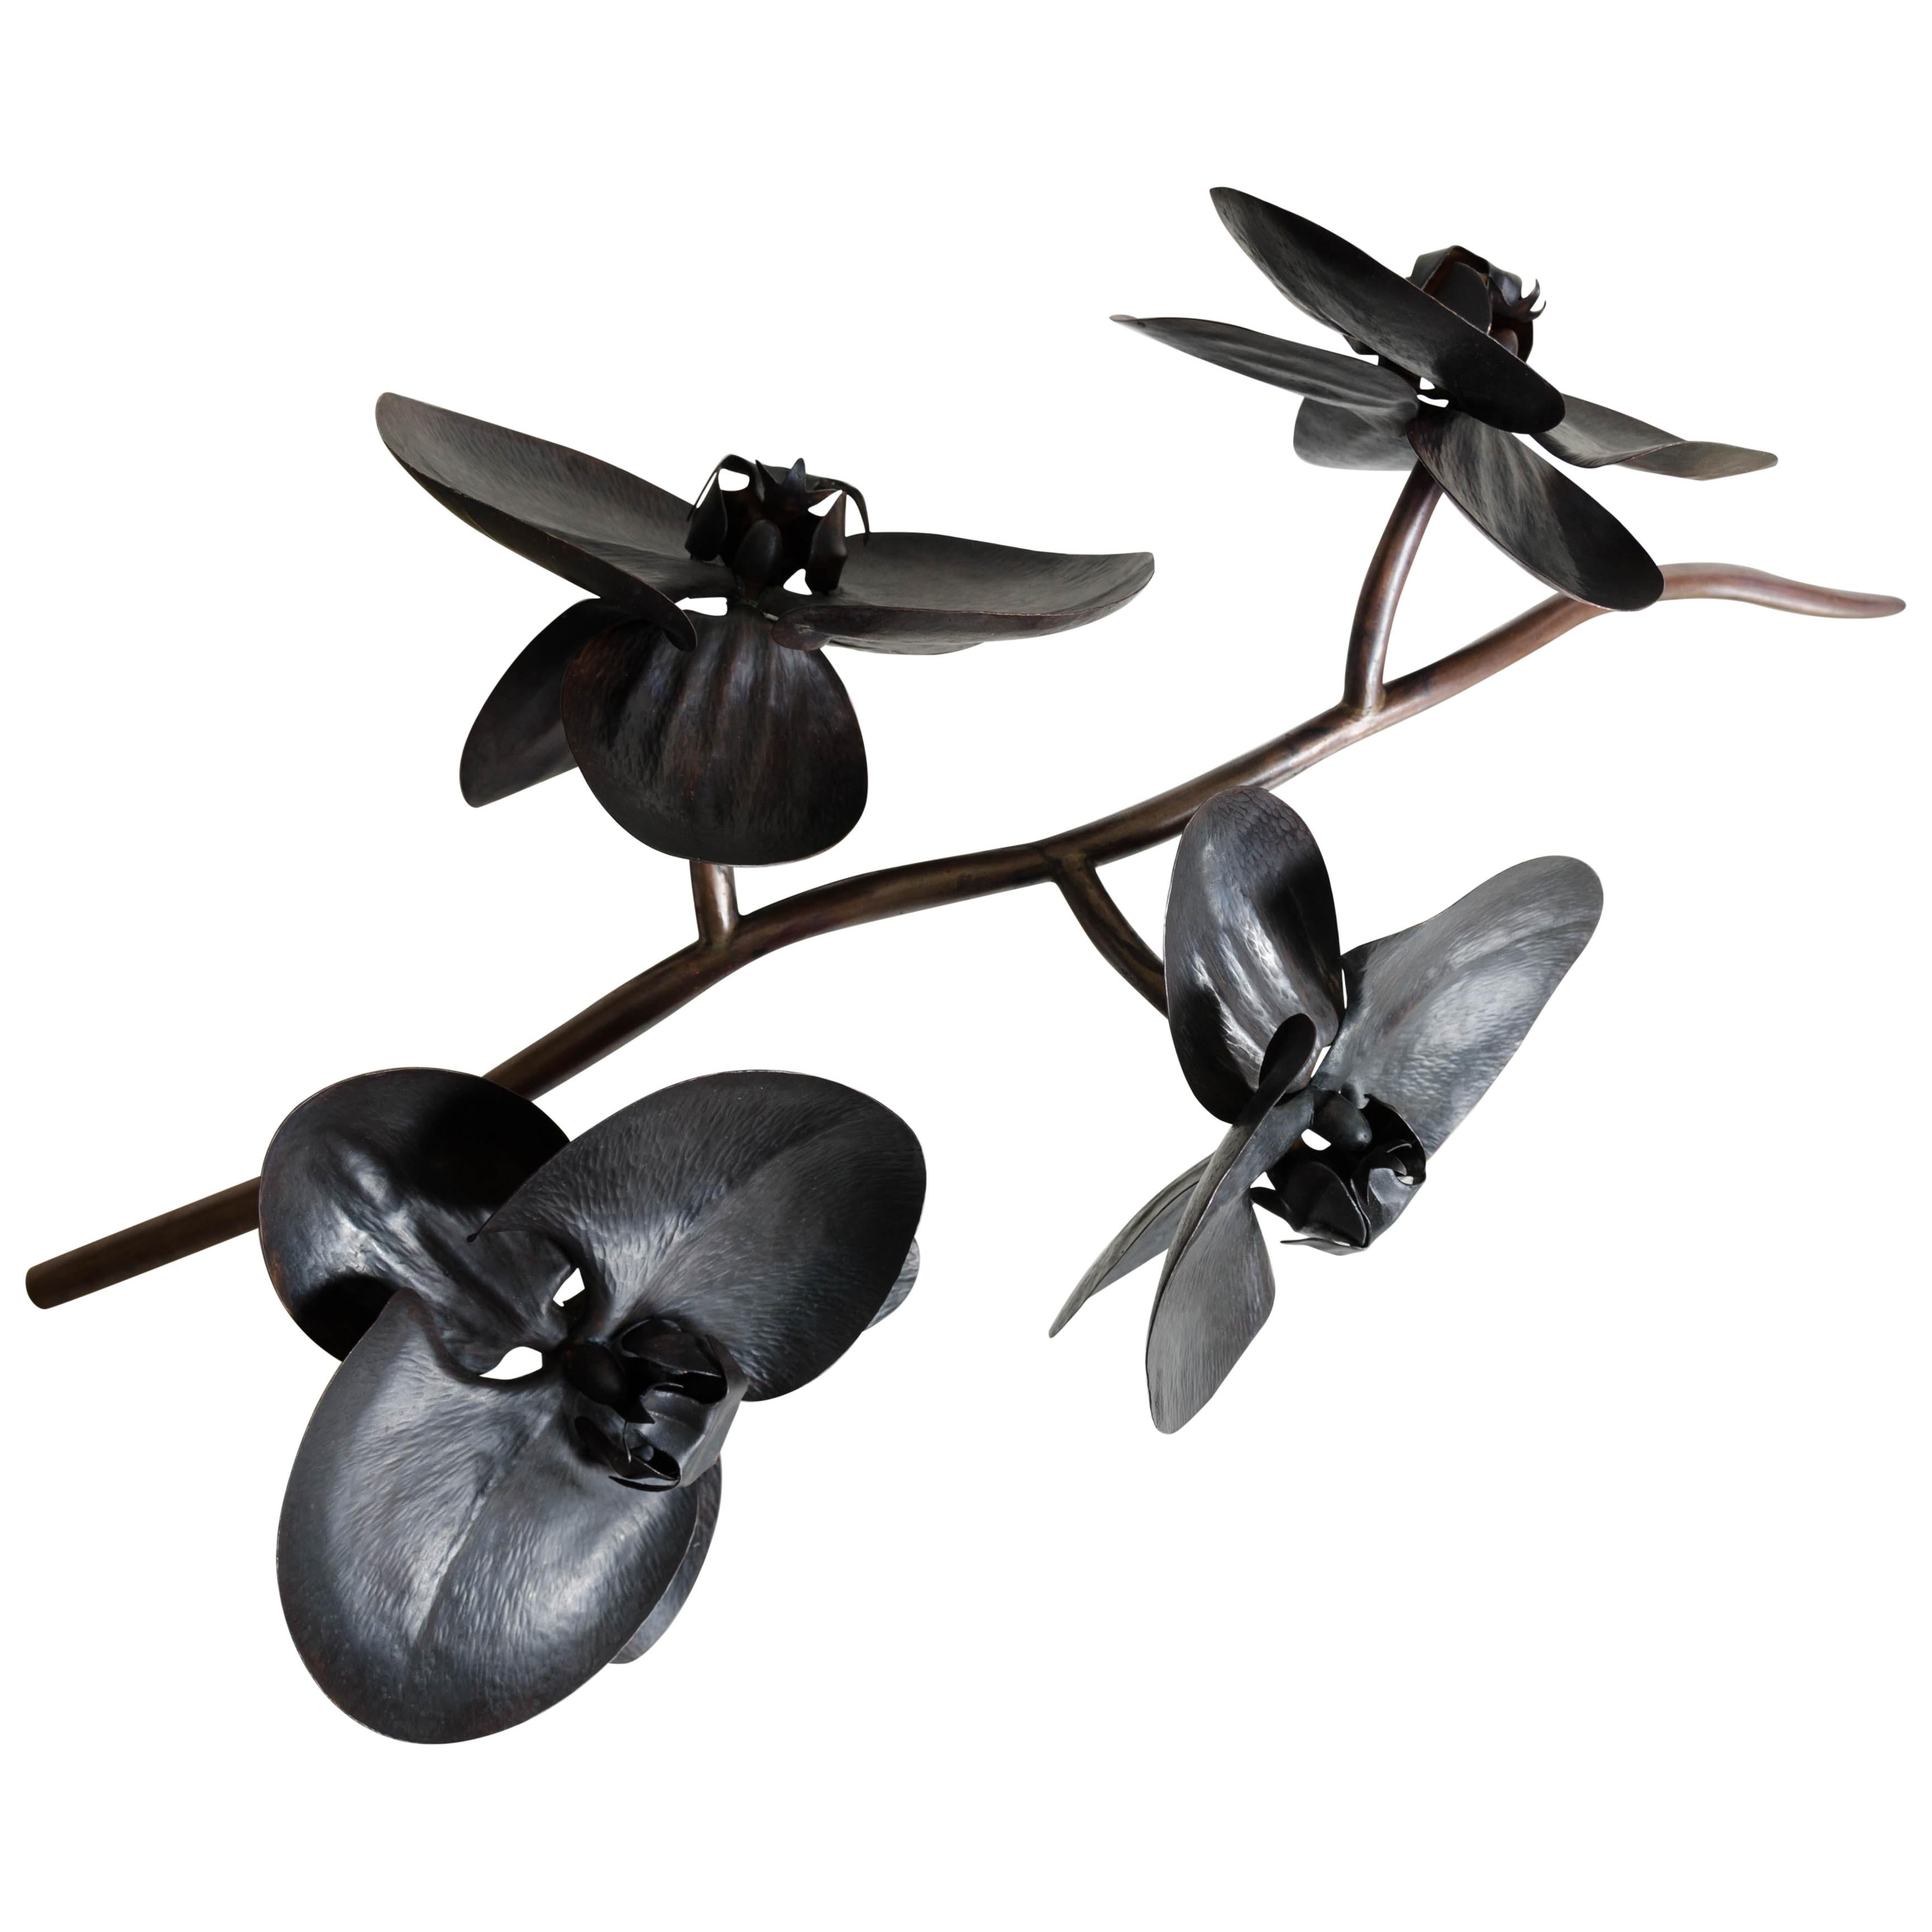 Large Orchid Sculpture by Robert Kuo, Hand Repoussé Copper, Limited Edition